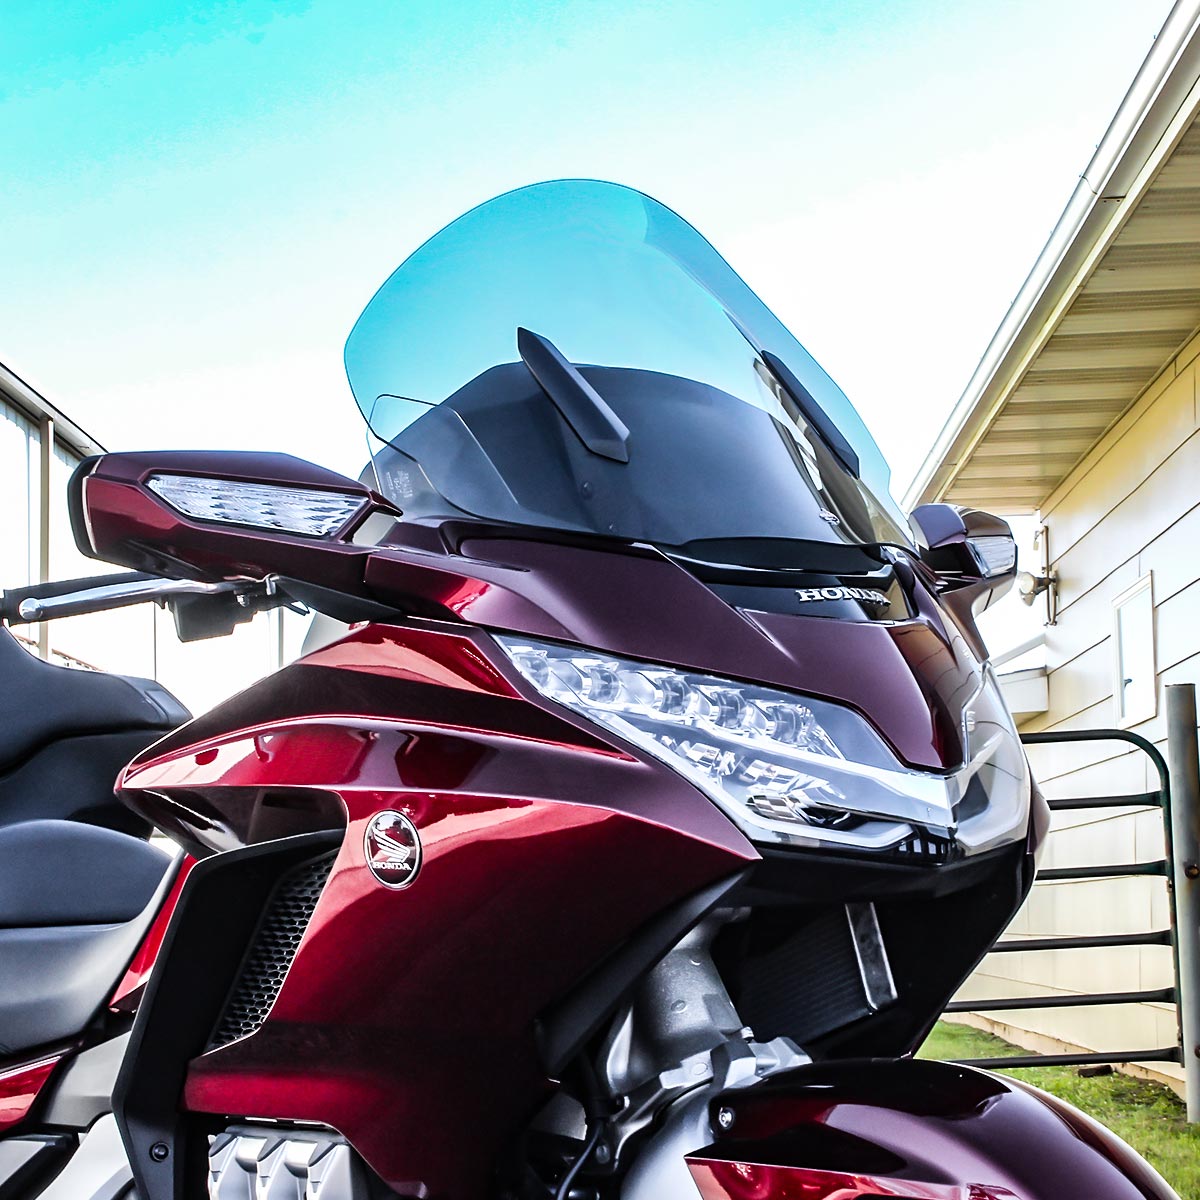 18" Tint Flare™ Windshield for Honda® 2018-2024 Gold Wing motorcycle models(18" Tint)